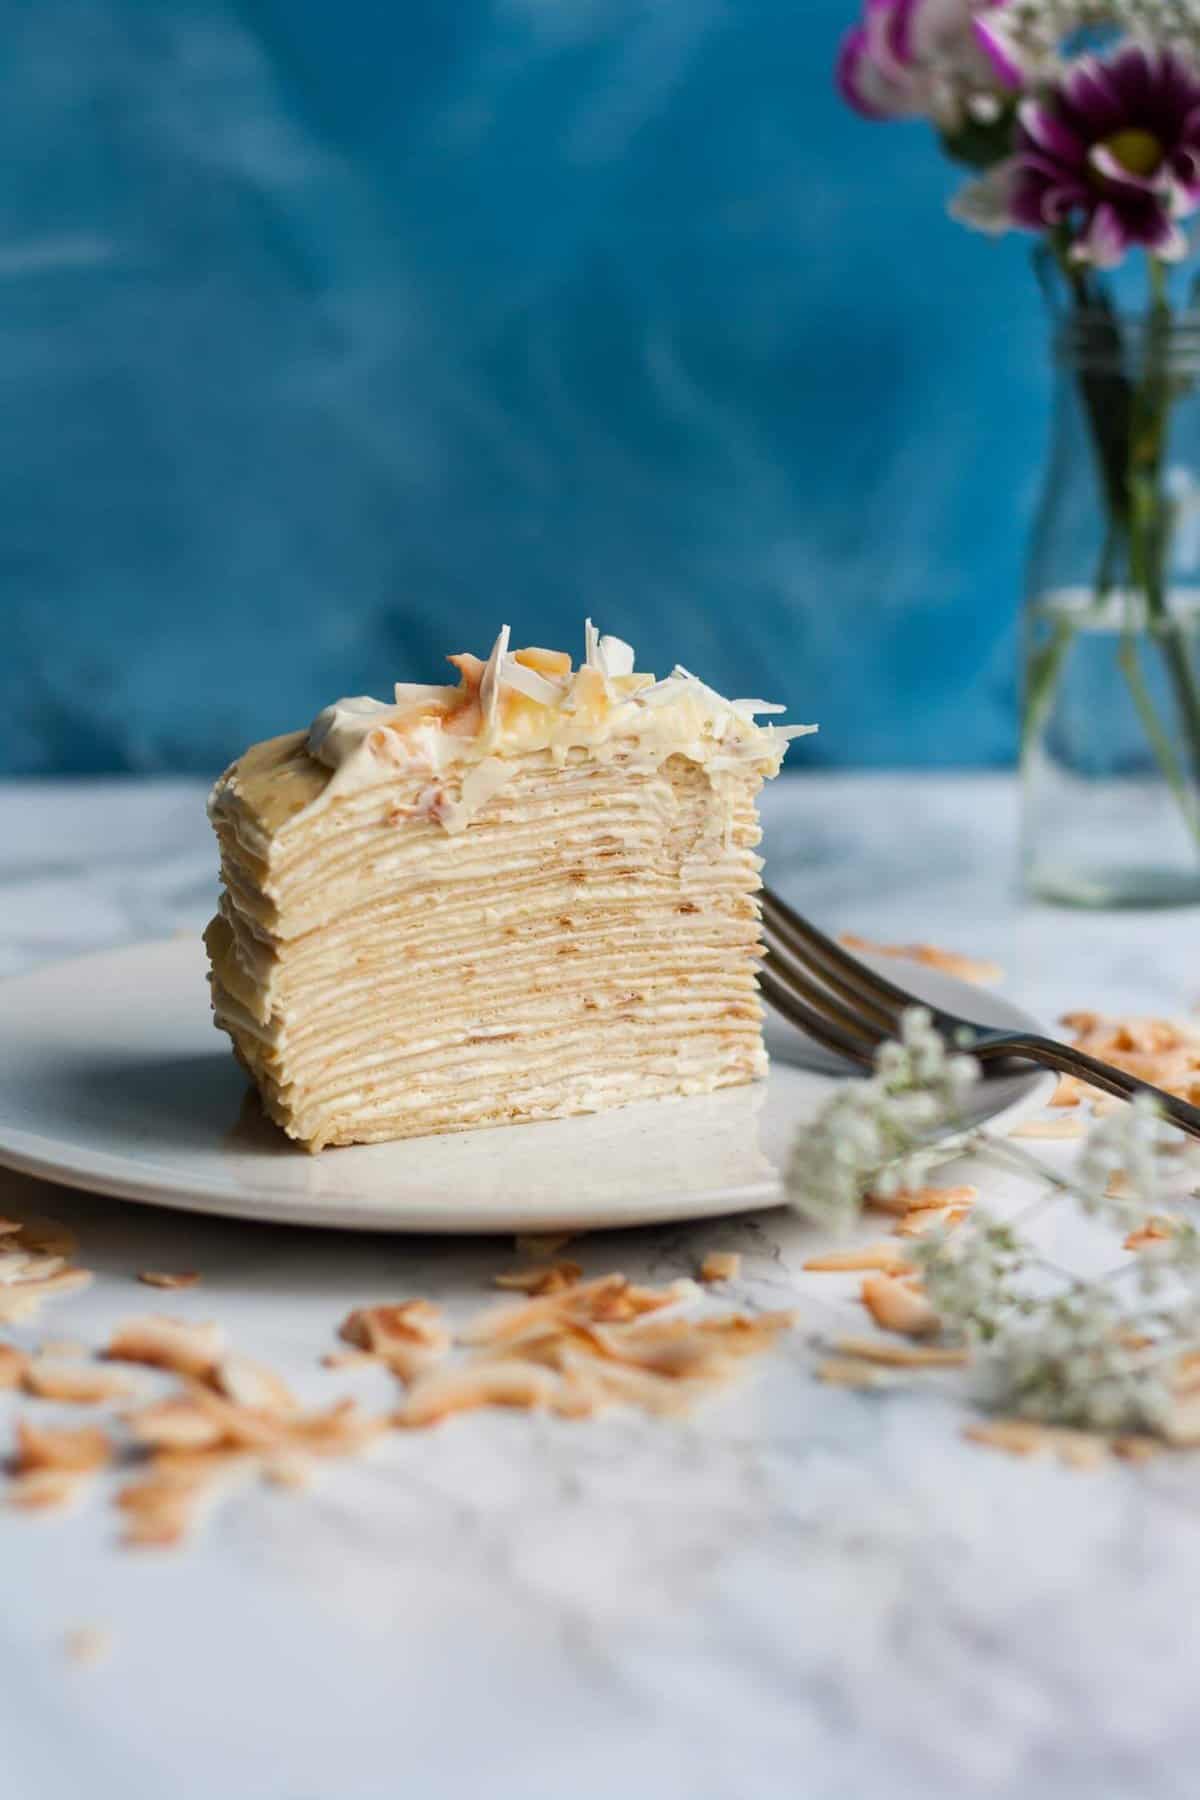 A layered wedge of crepe cake on a plate with a fork.